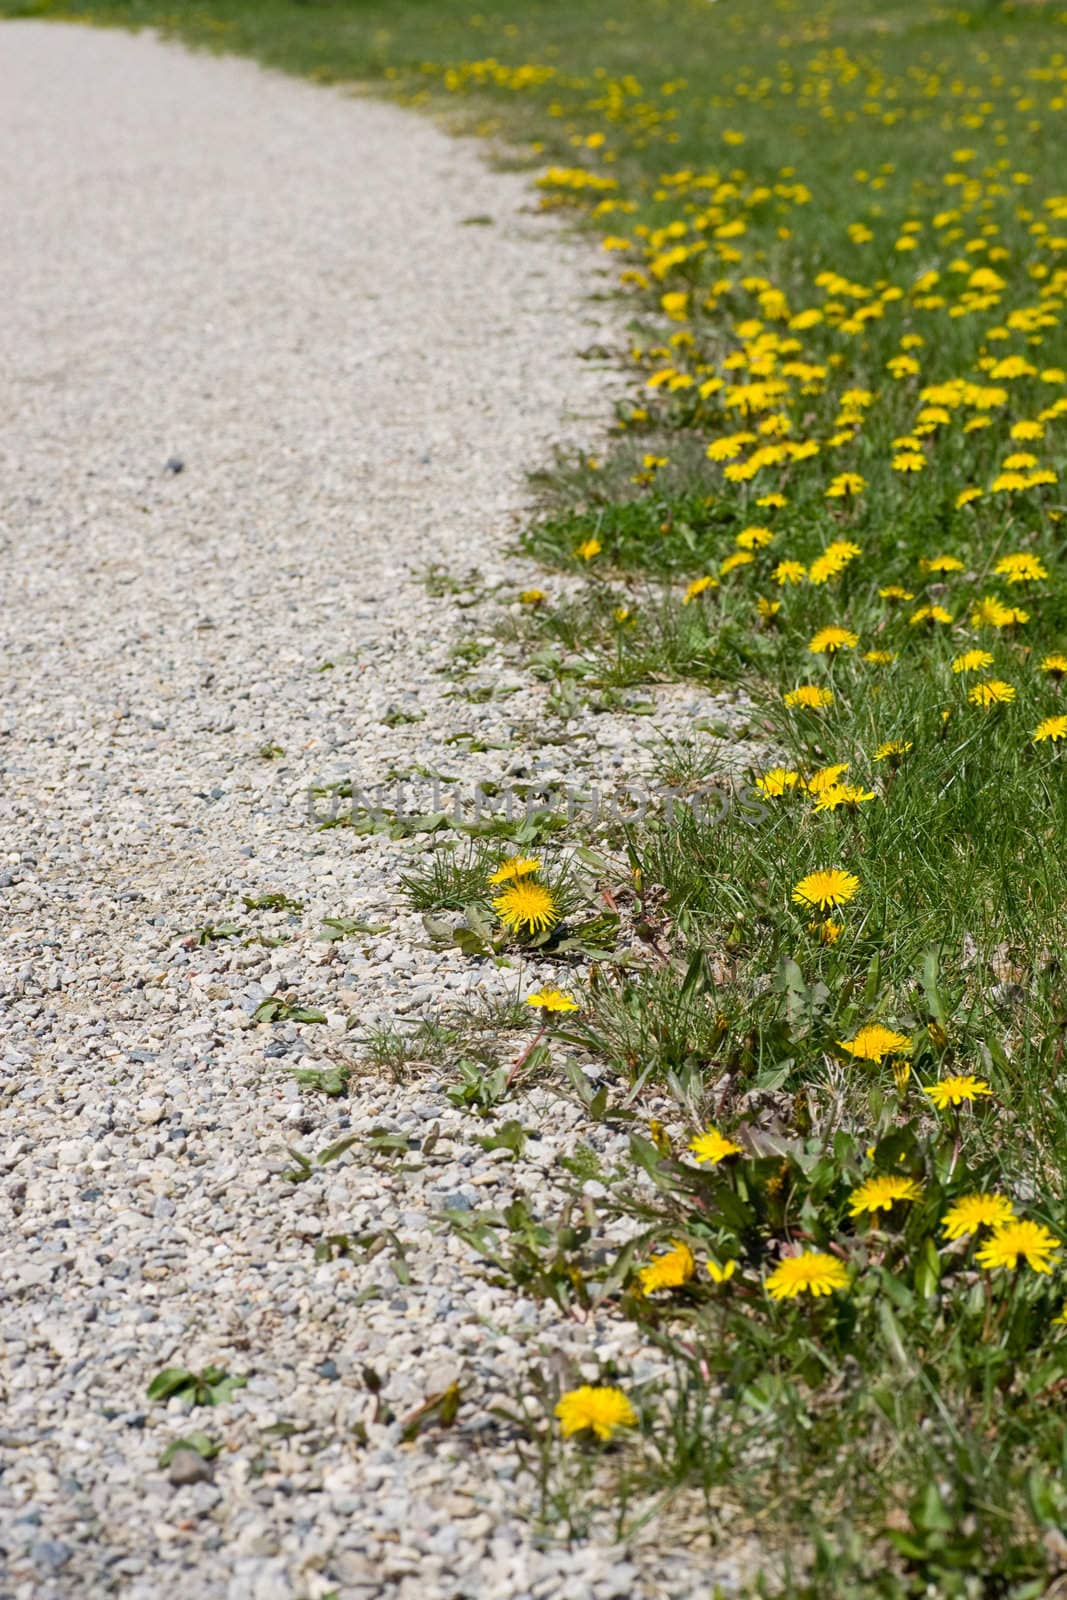 Following a gravel path, lined with green grass and dandelions.